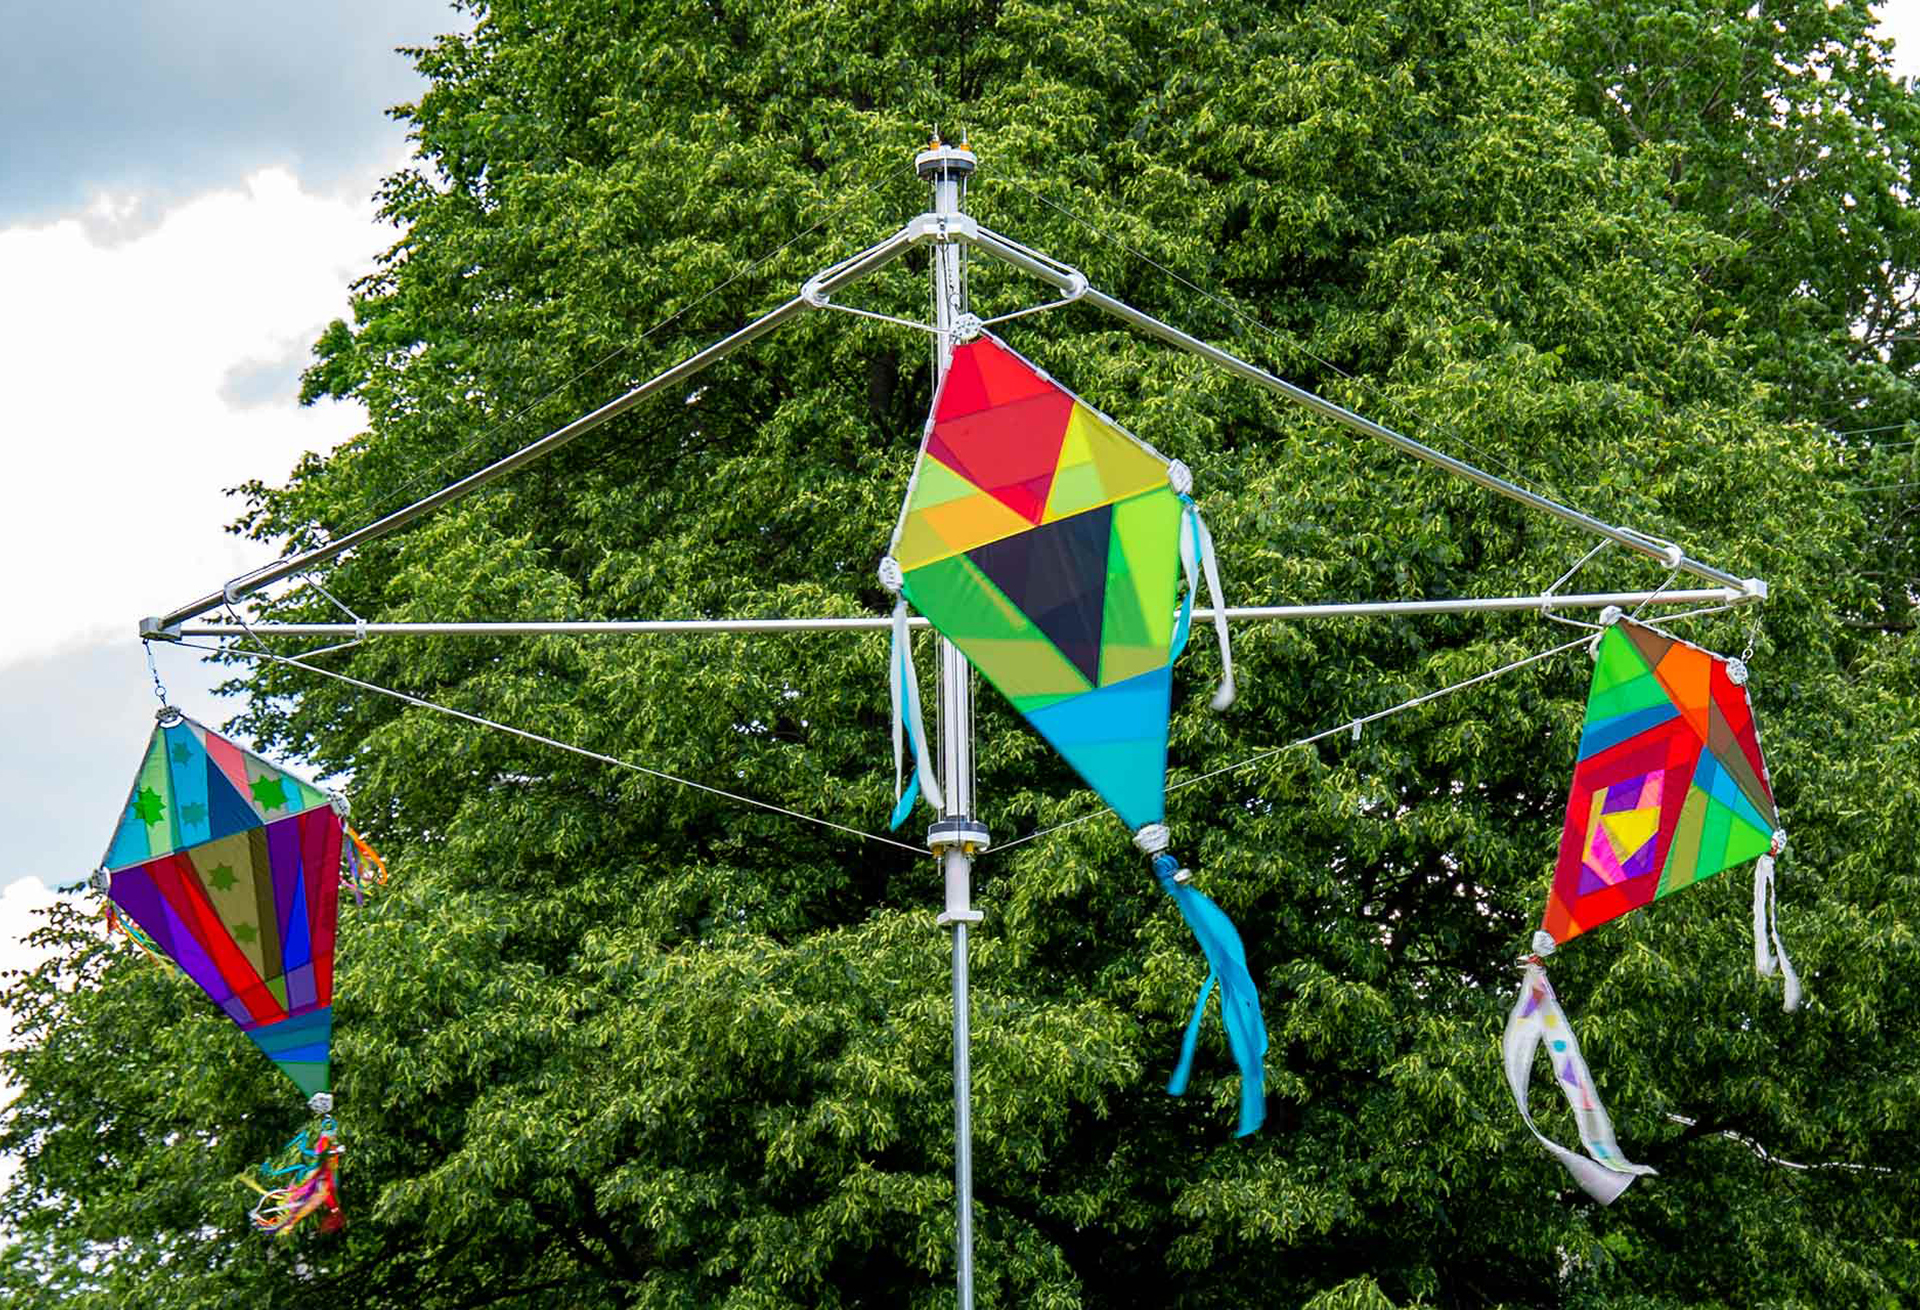 Three kites with geometric rainbow-colored patterns are hanged to a kite-shaped metal frame